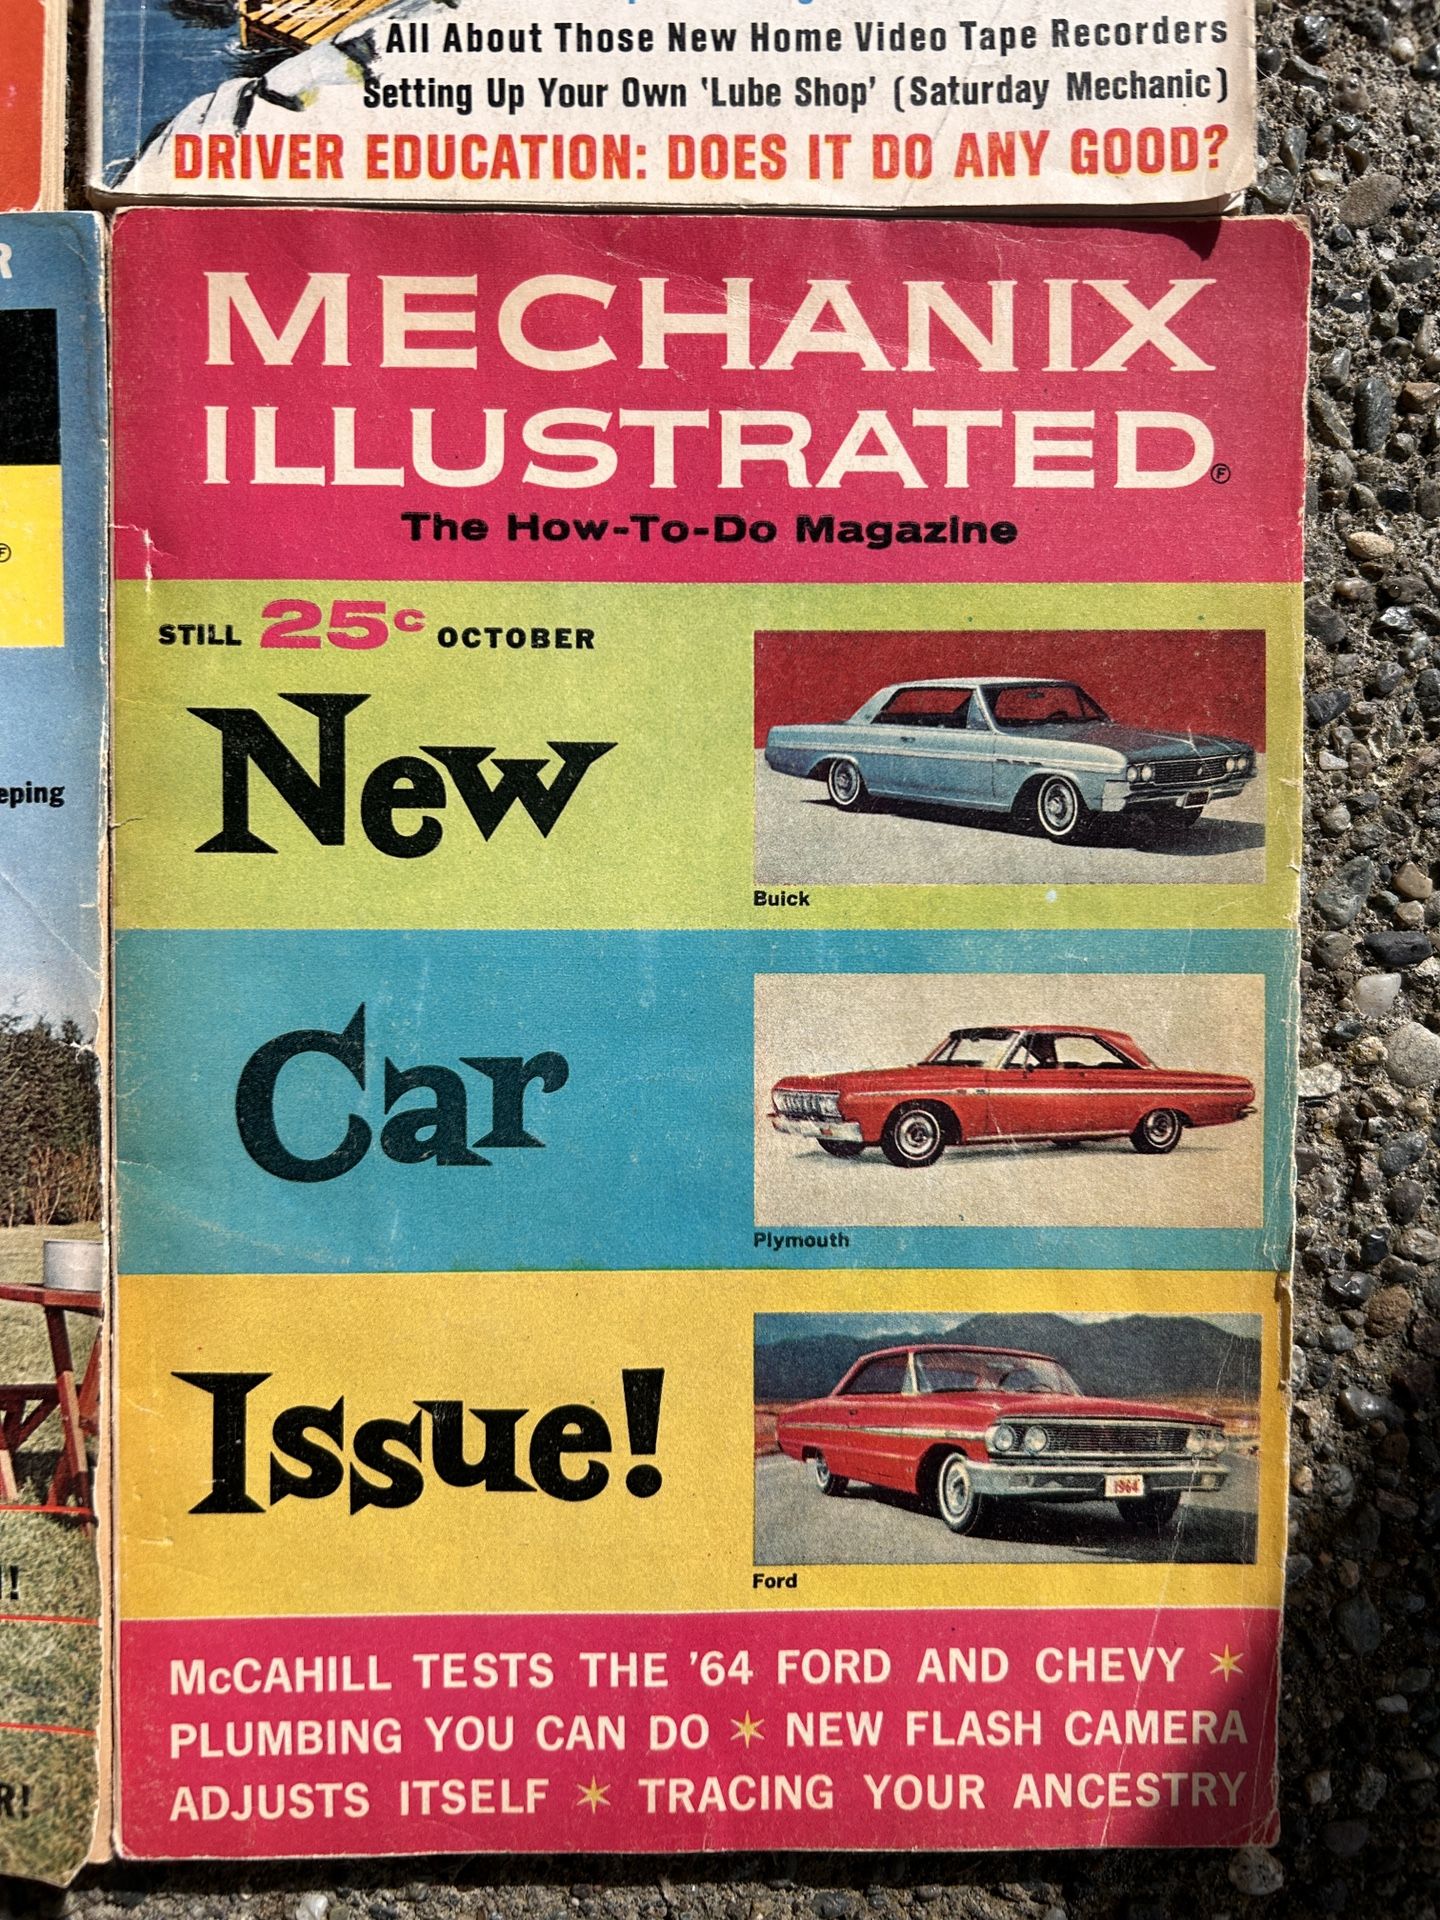 Classic 1964 Car Owners Must Have Mechanix Illustrated car guide from Oct 1963 - Very Good Condition